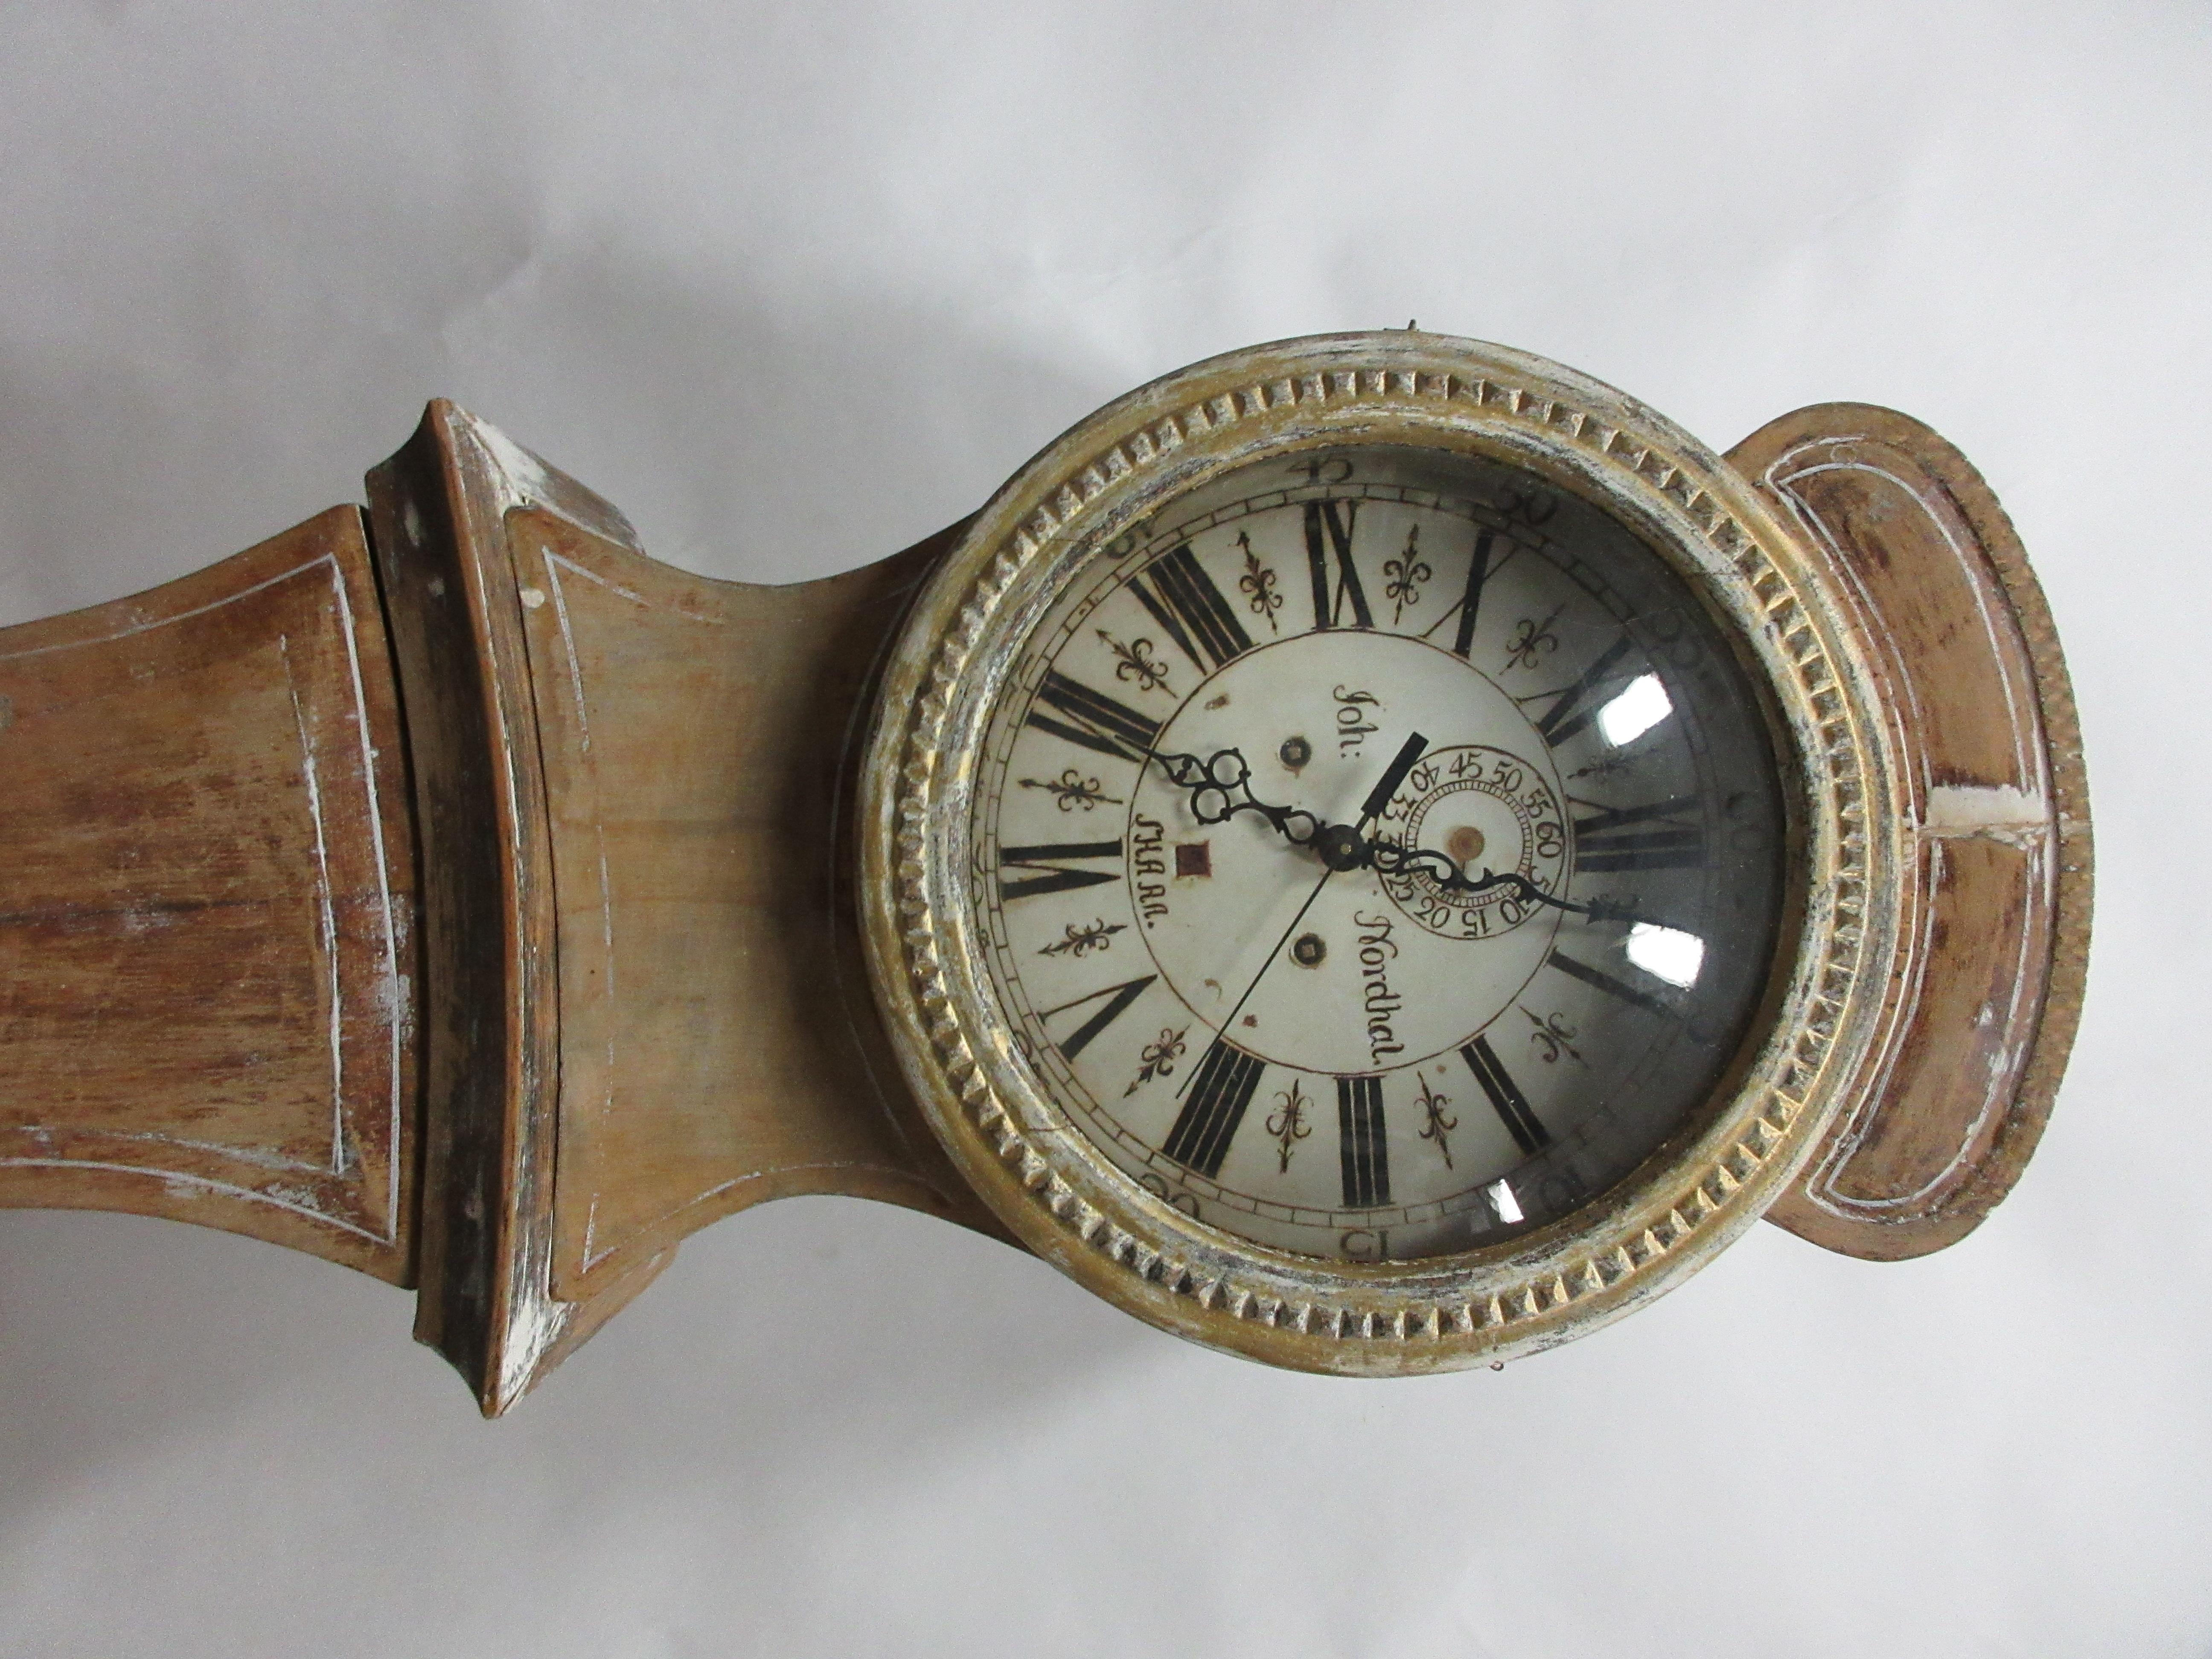 This is an unusual 100% Original Swedish Mora Clock Sven Nilsson Morin Model.
 Sven Nilsson Morin made his clocks from 1780 to 1810 and is one of Sweden's most famous clock makers.